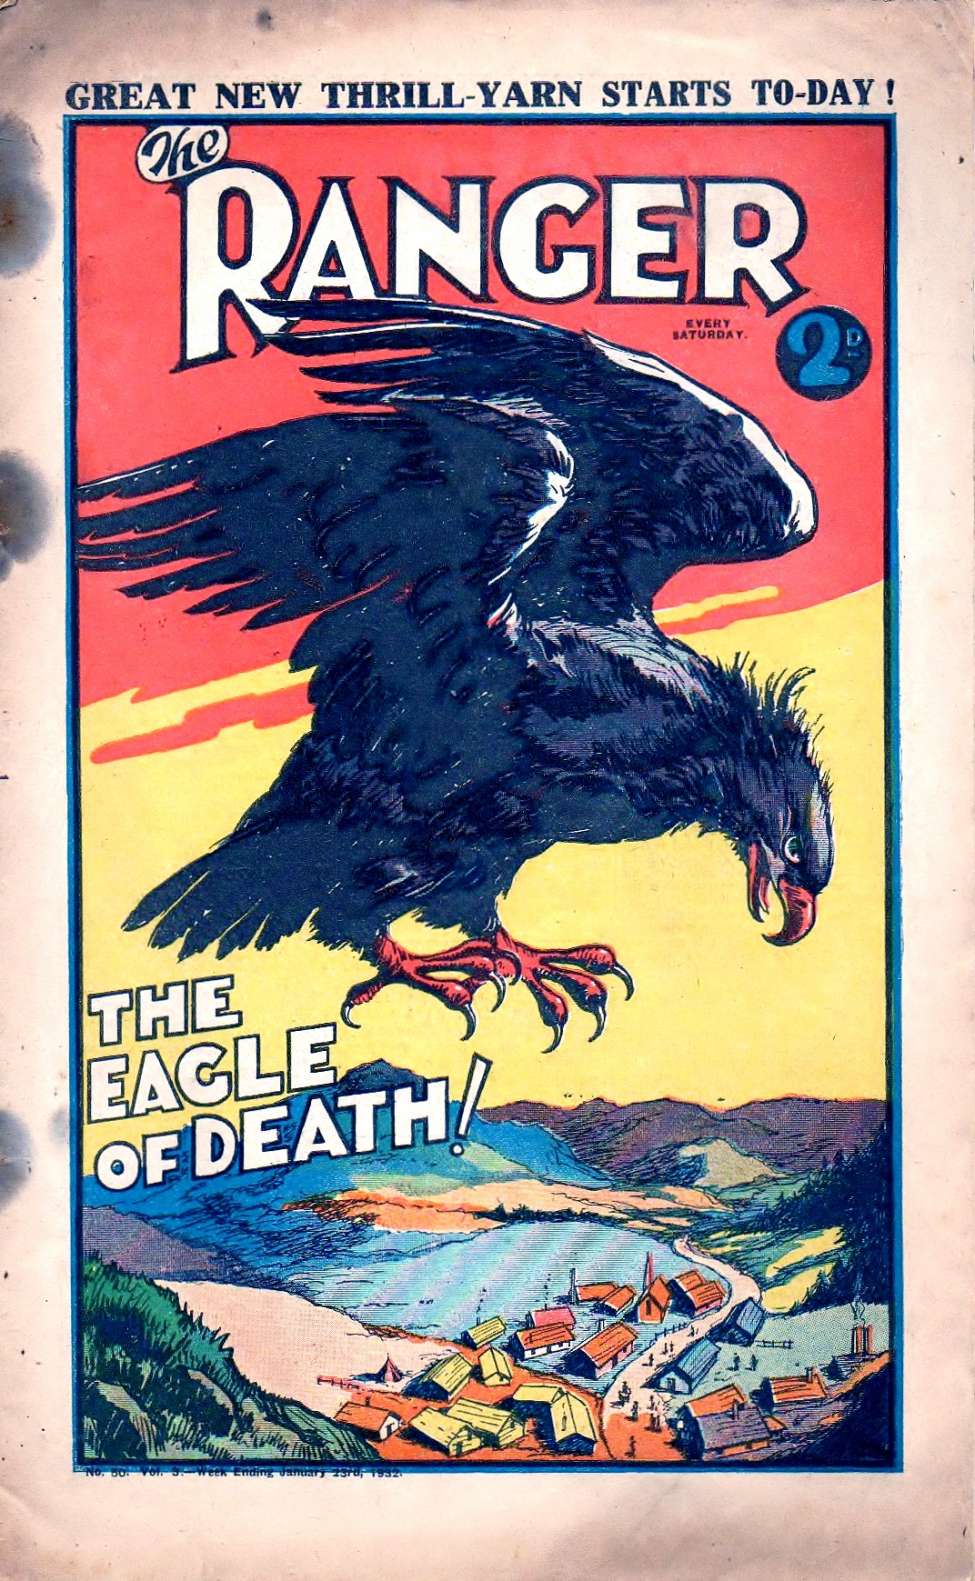 Book Cover For Ranger 50 - The Eagle of Death!